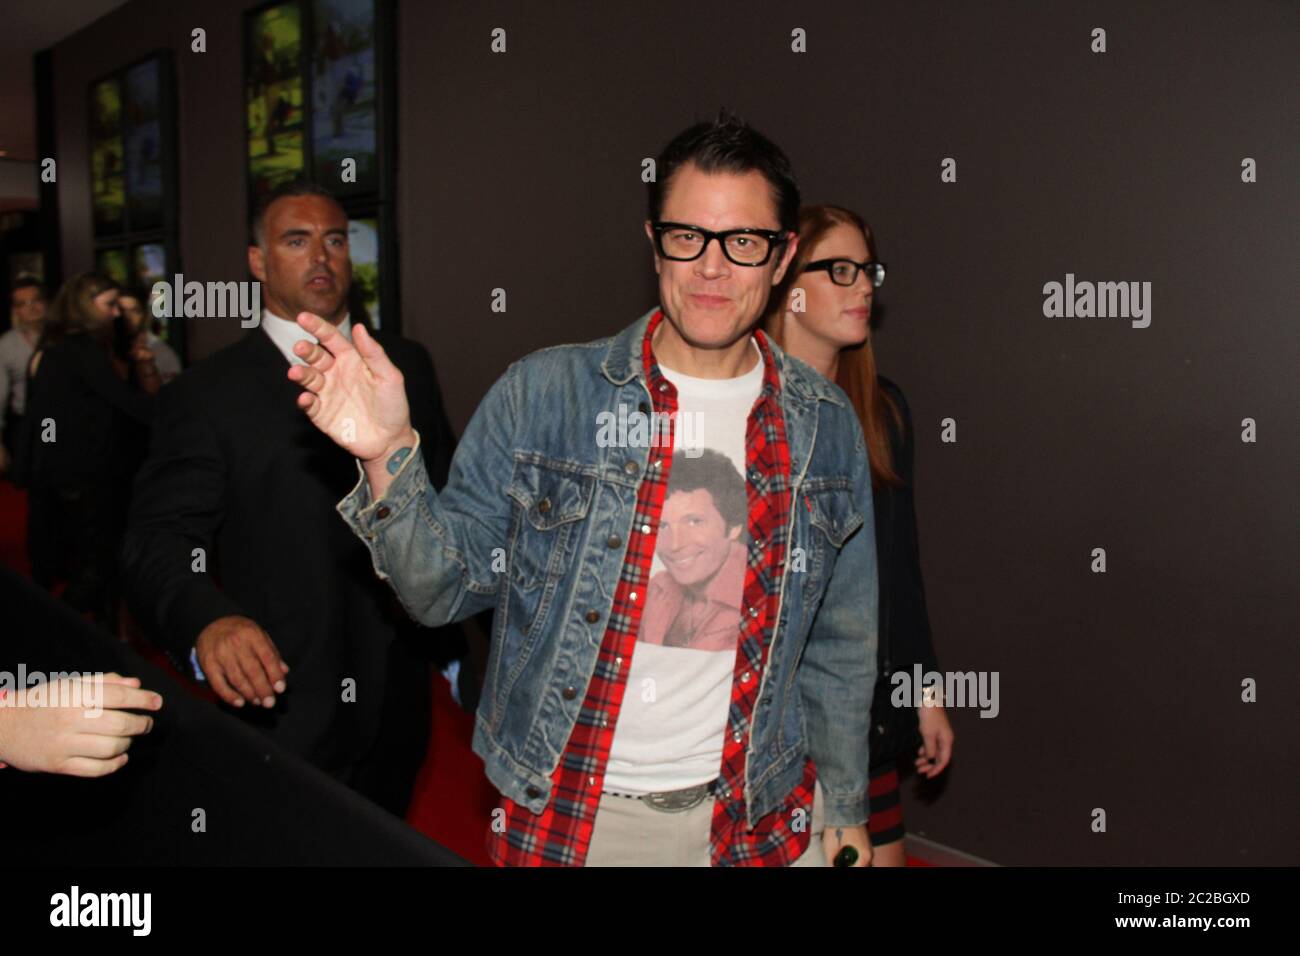 Johnny Knoxville ‘Irving Zisman’ waves to fans as he arrives at the Australian Special Event Screening of Jackass Presents: Bad Grandpa at Event Cinem Stock Photo